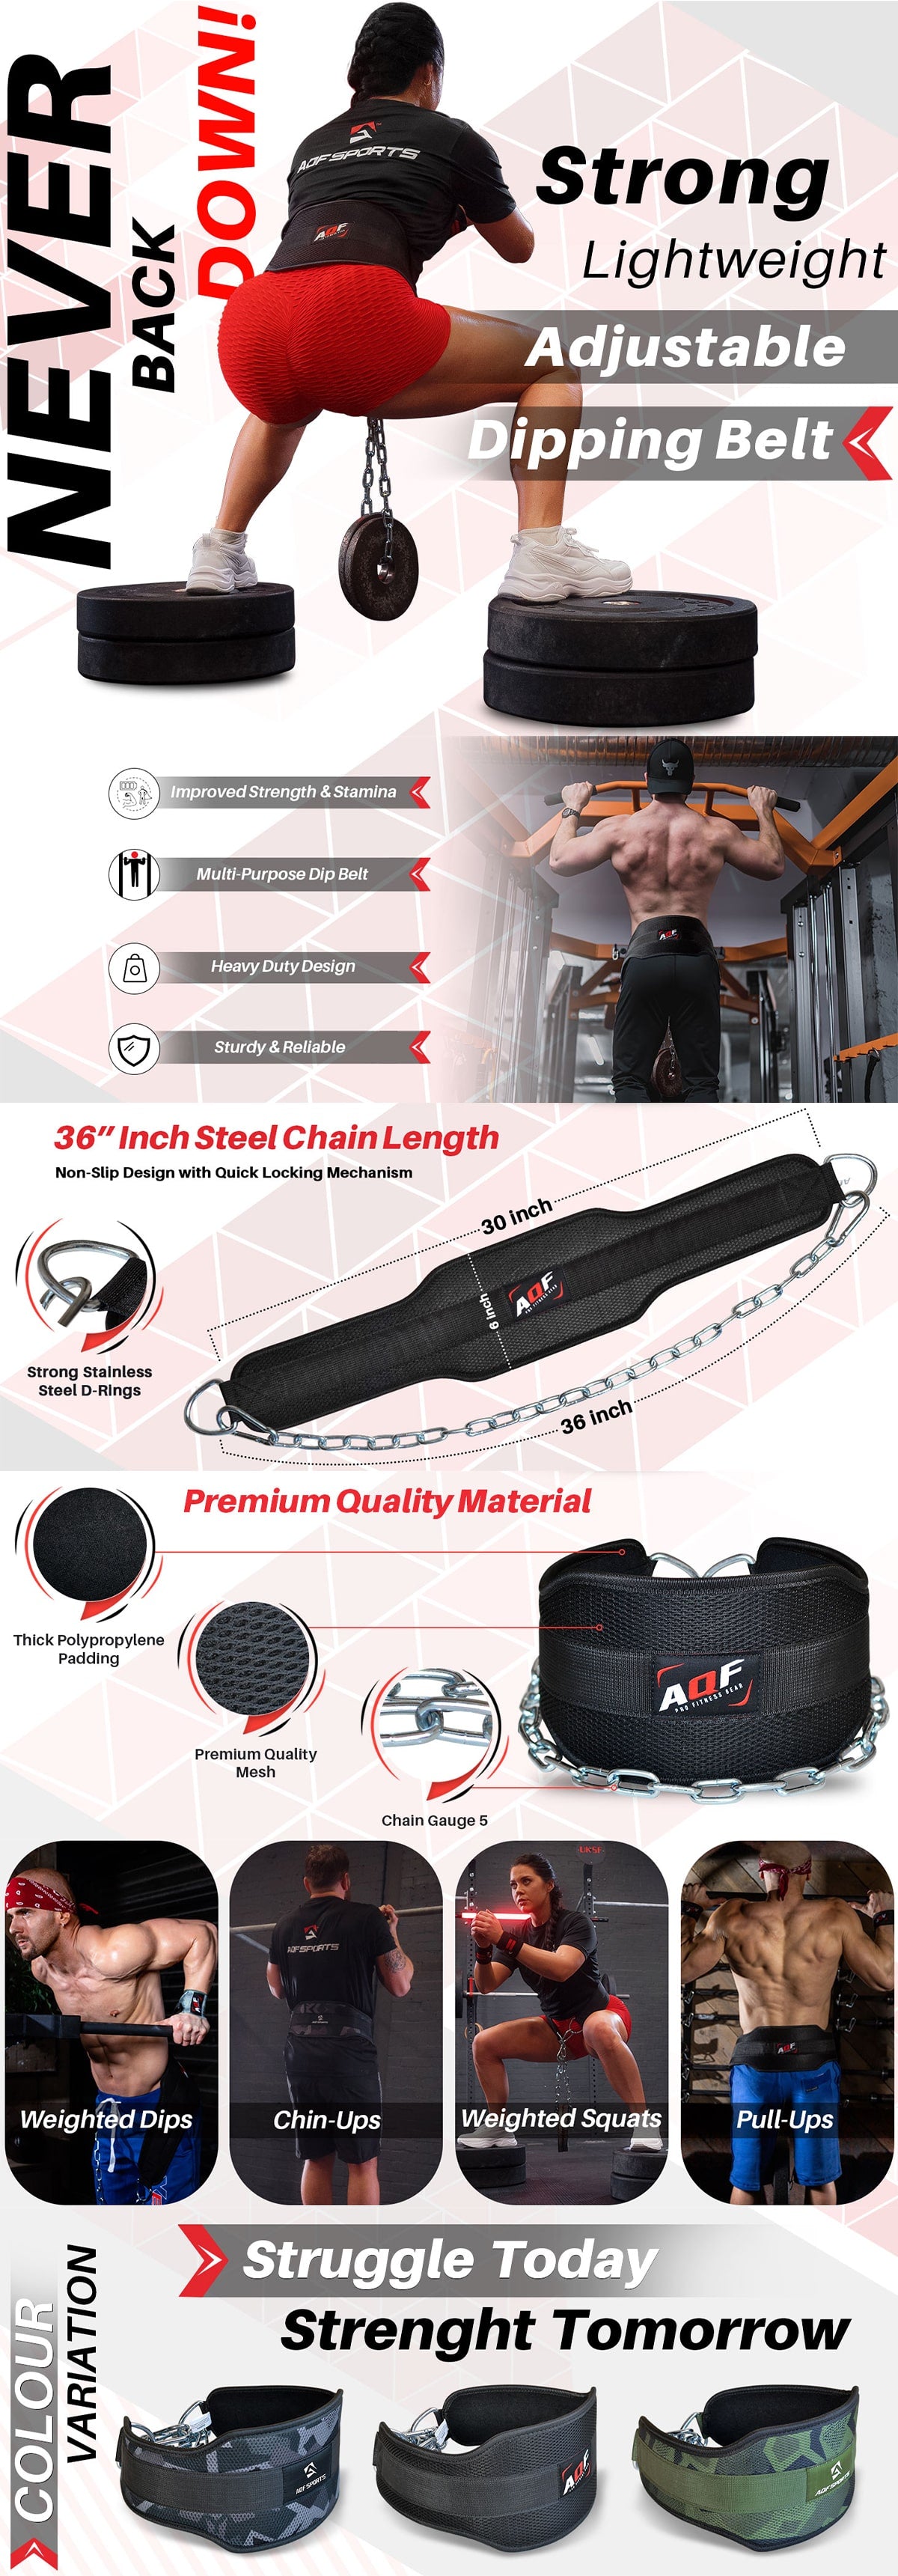 AQF Dipping Belt with Chain - AQF Sports